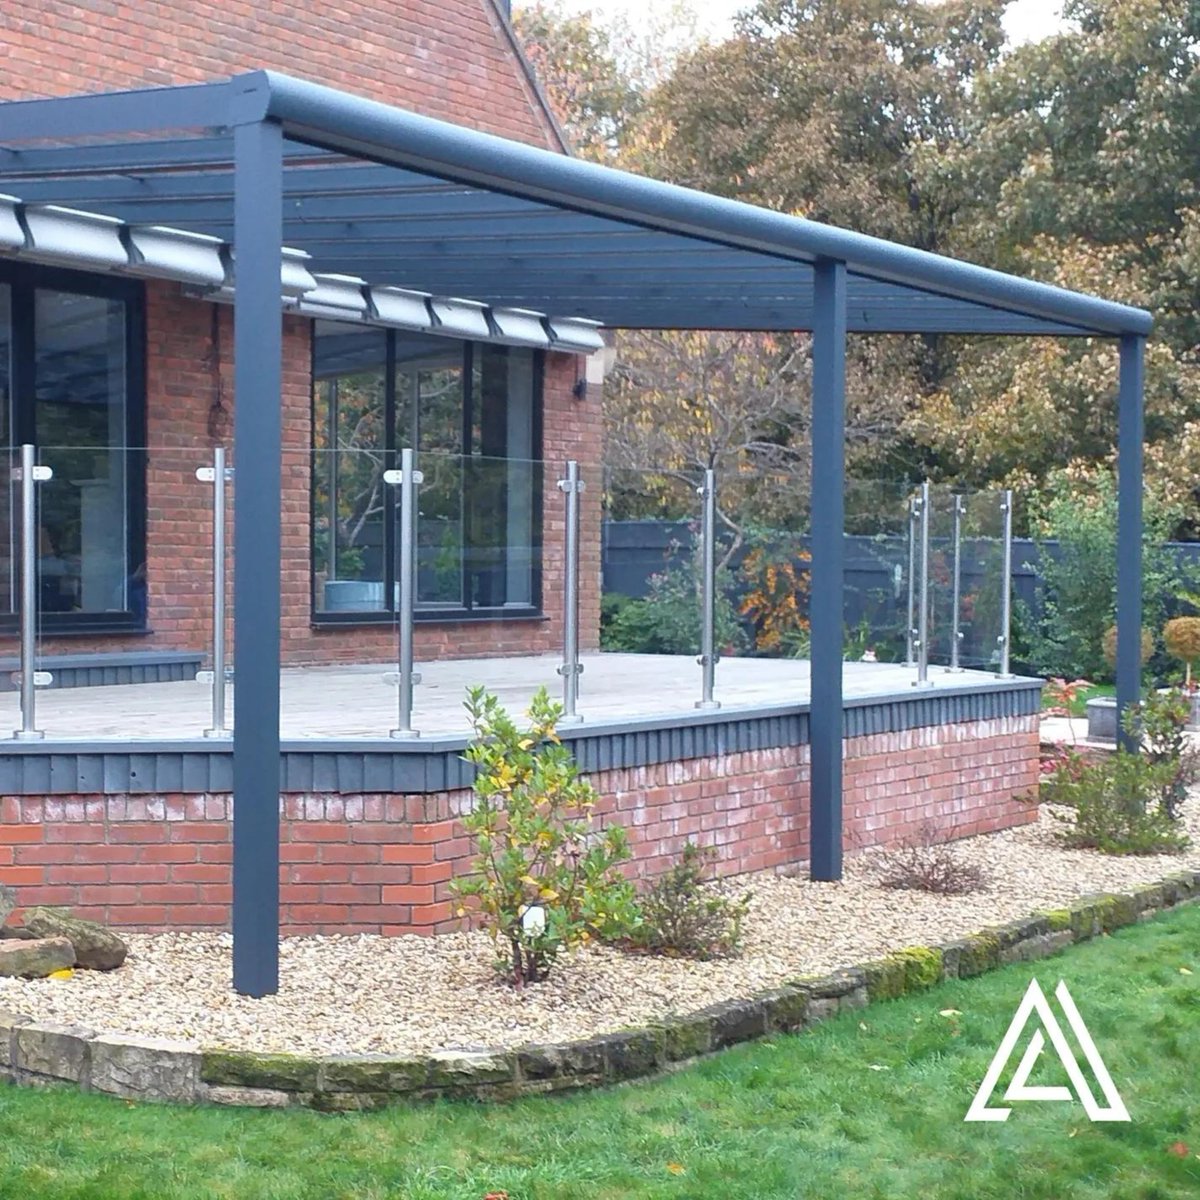 Discover Morvelle: Where precision meets perfection 🏡

It's time to elevate your outdoor living, get in touch with us today 📲

#Alfresko #gardenrooms #canopy #canopies #pergolas #verandas #glassrooms #garden #aluminiumcanopies #northeast #gardensanctuary #outdoorliving